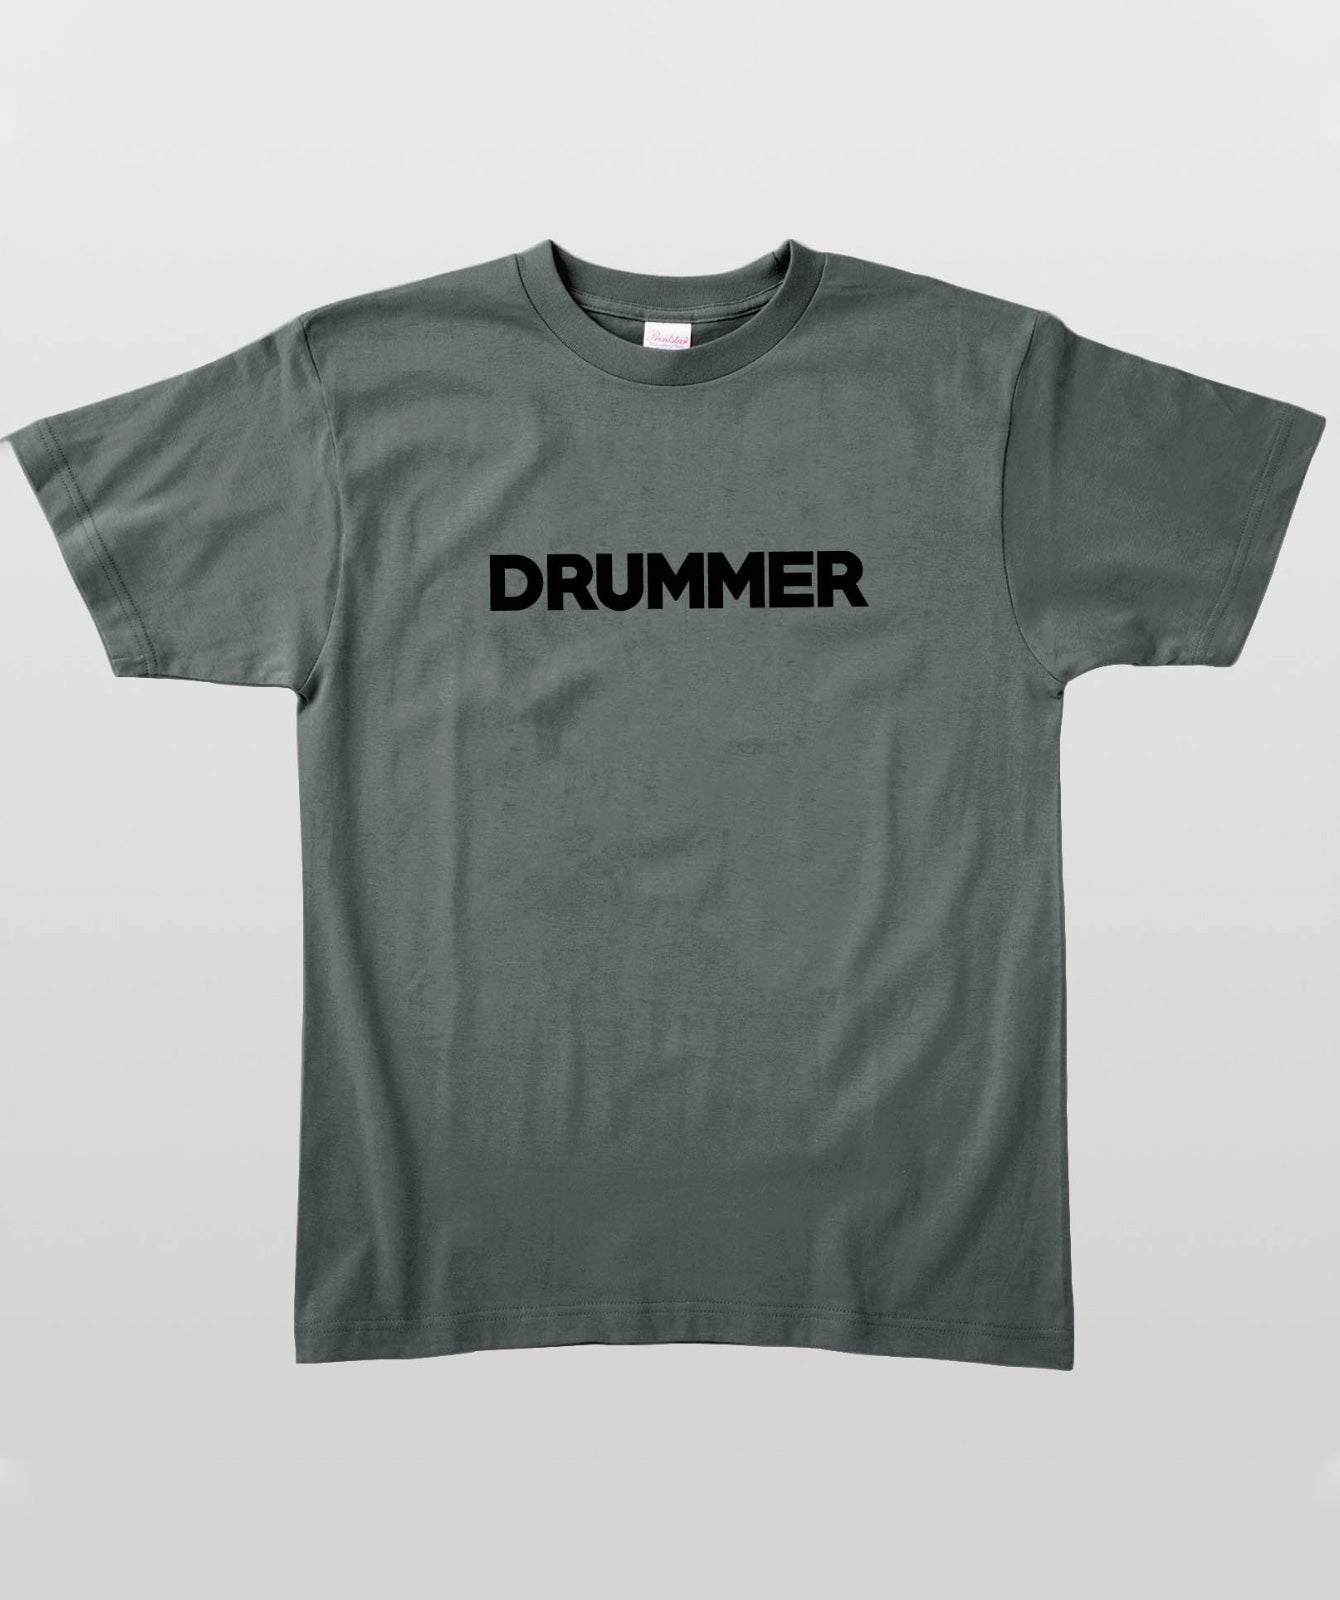 MS PLAYER SERIES ～DRUMMER Type D～